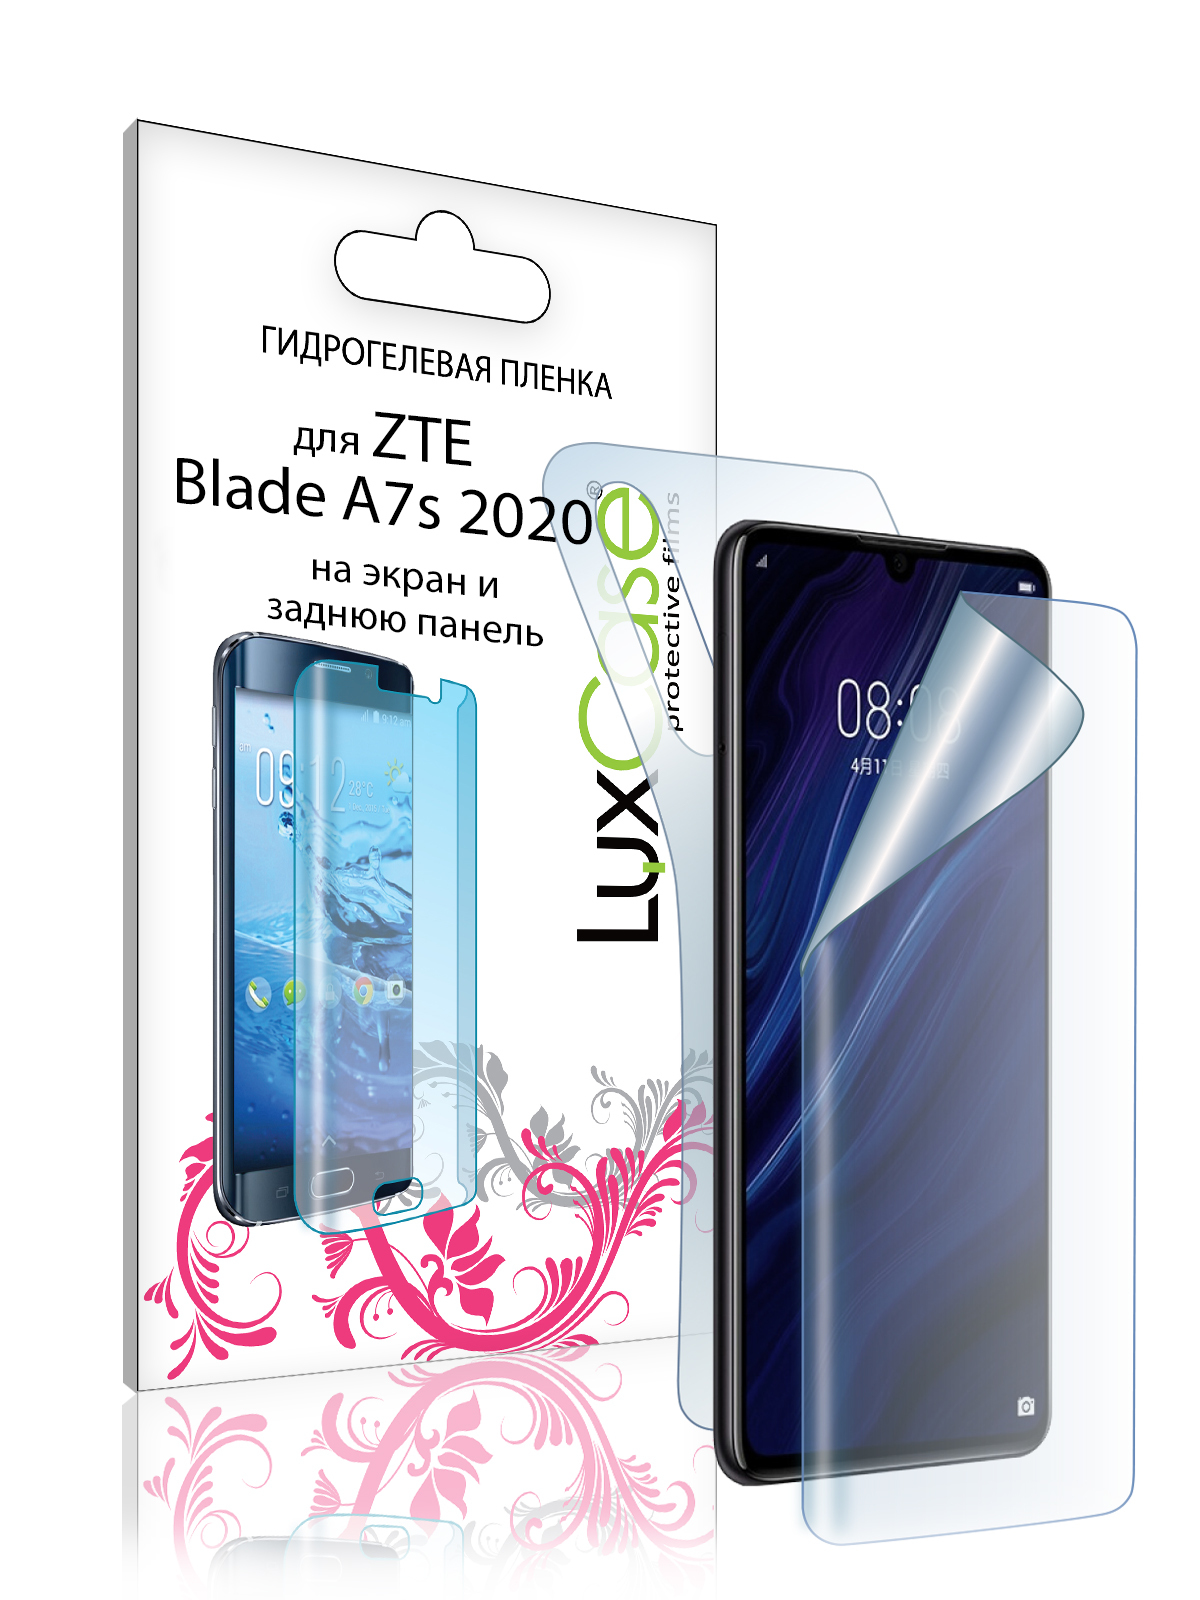 гидрогелевая пленка luxcase для zte blade a7s 2020 0 14mm front and back transperent 86714 Пленка гидрогелевая LuxCase для ZTE Blade A7S 2020 0.14mm Front and Back Transperent 86714